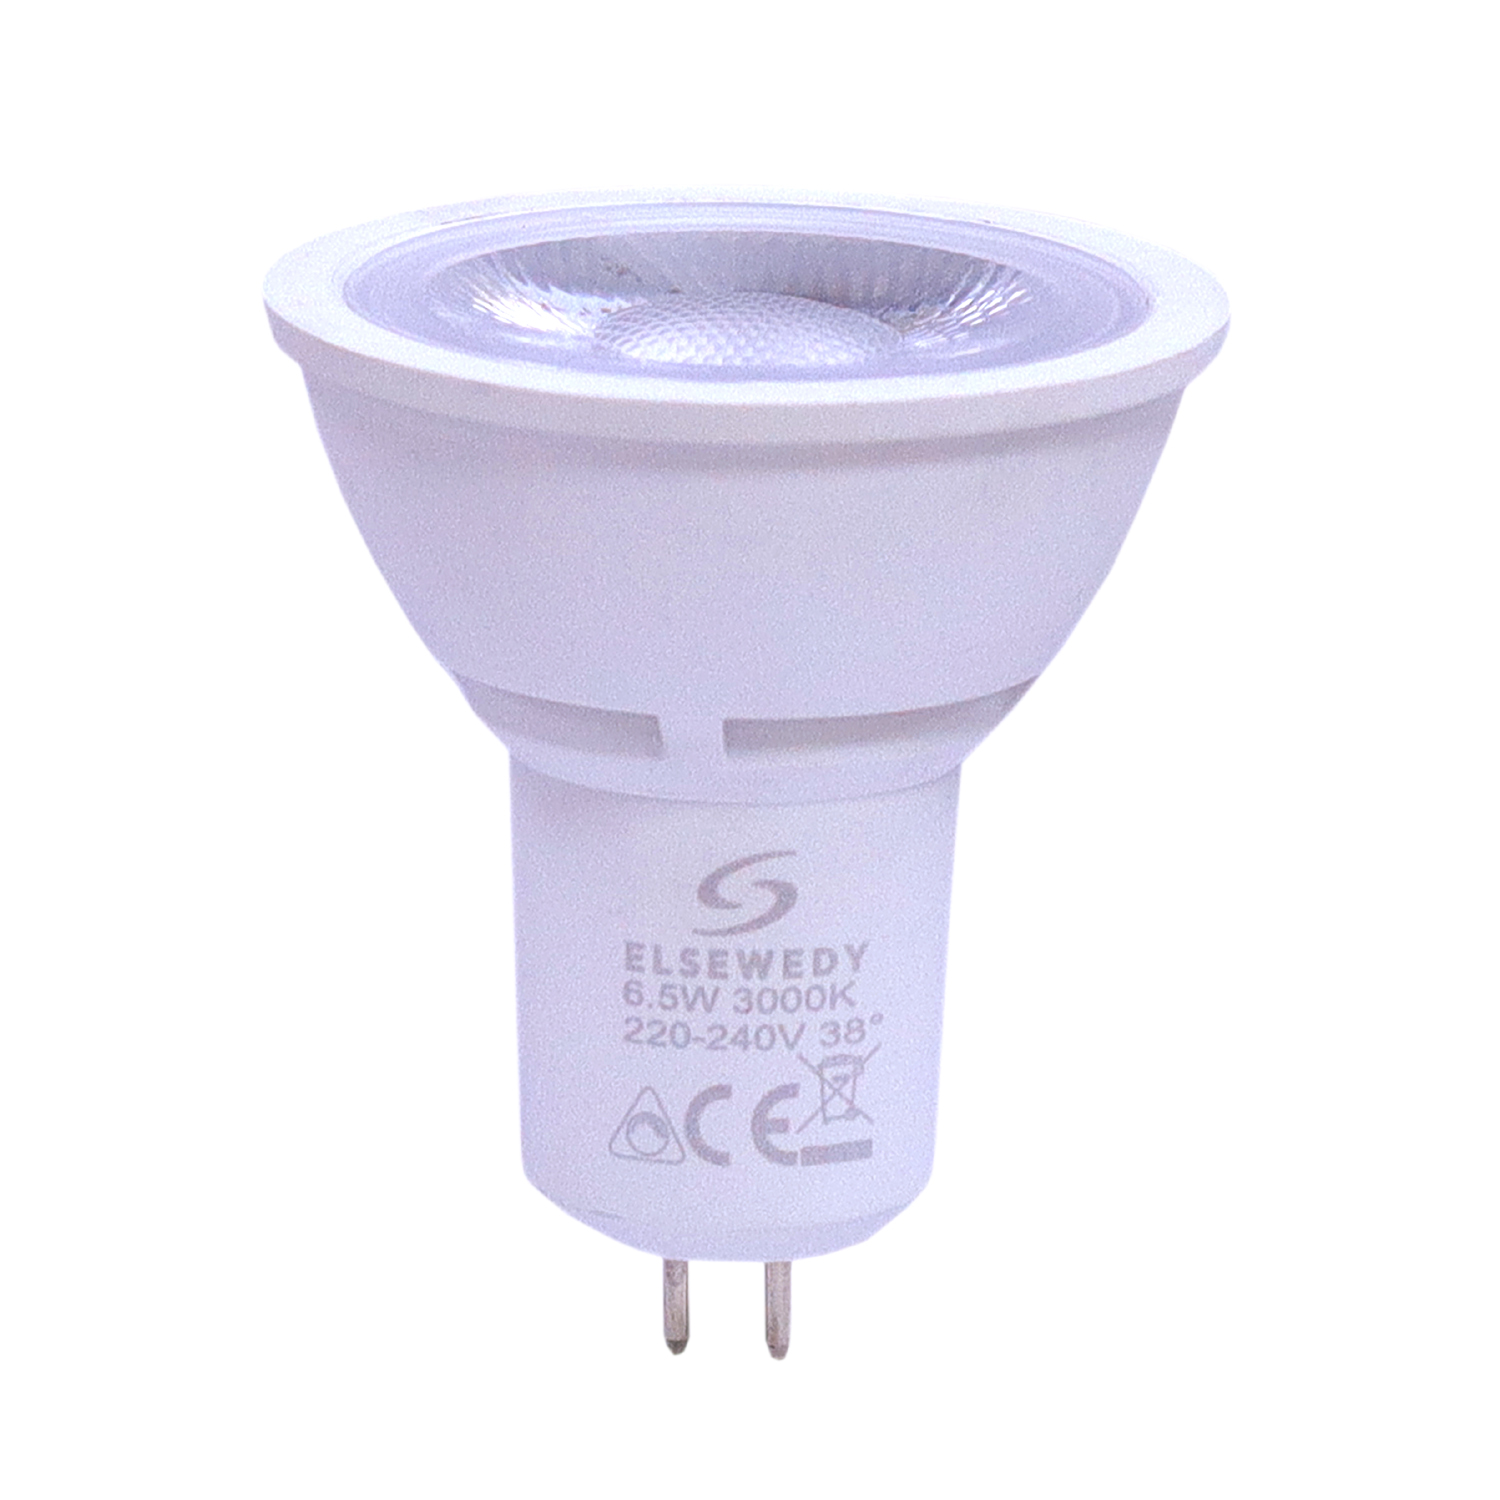 Classic E27 LED Lamp 6.5W Natural White 4000K Dimmable